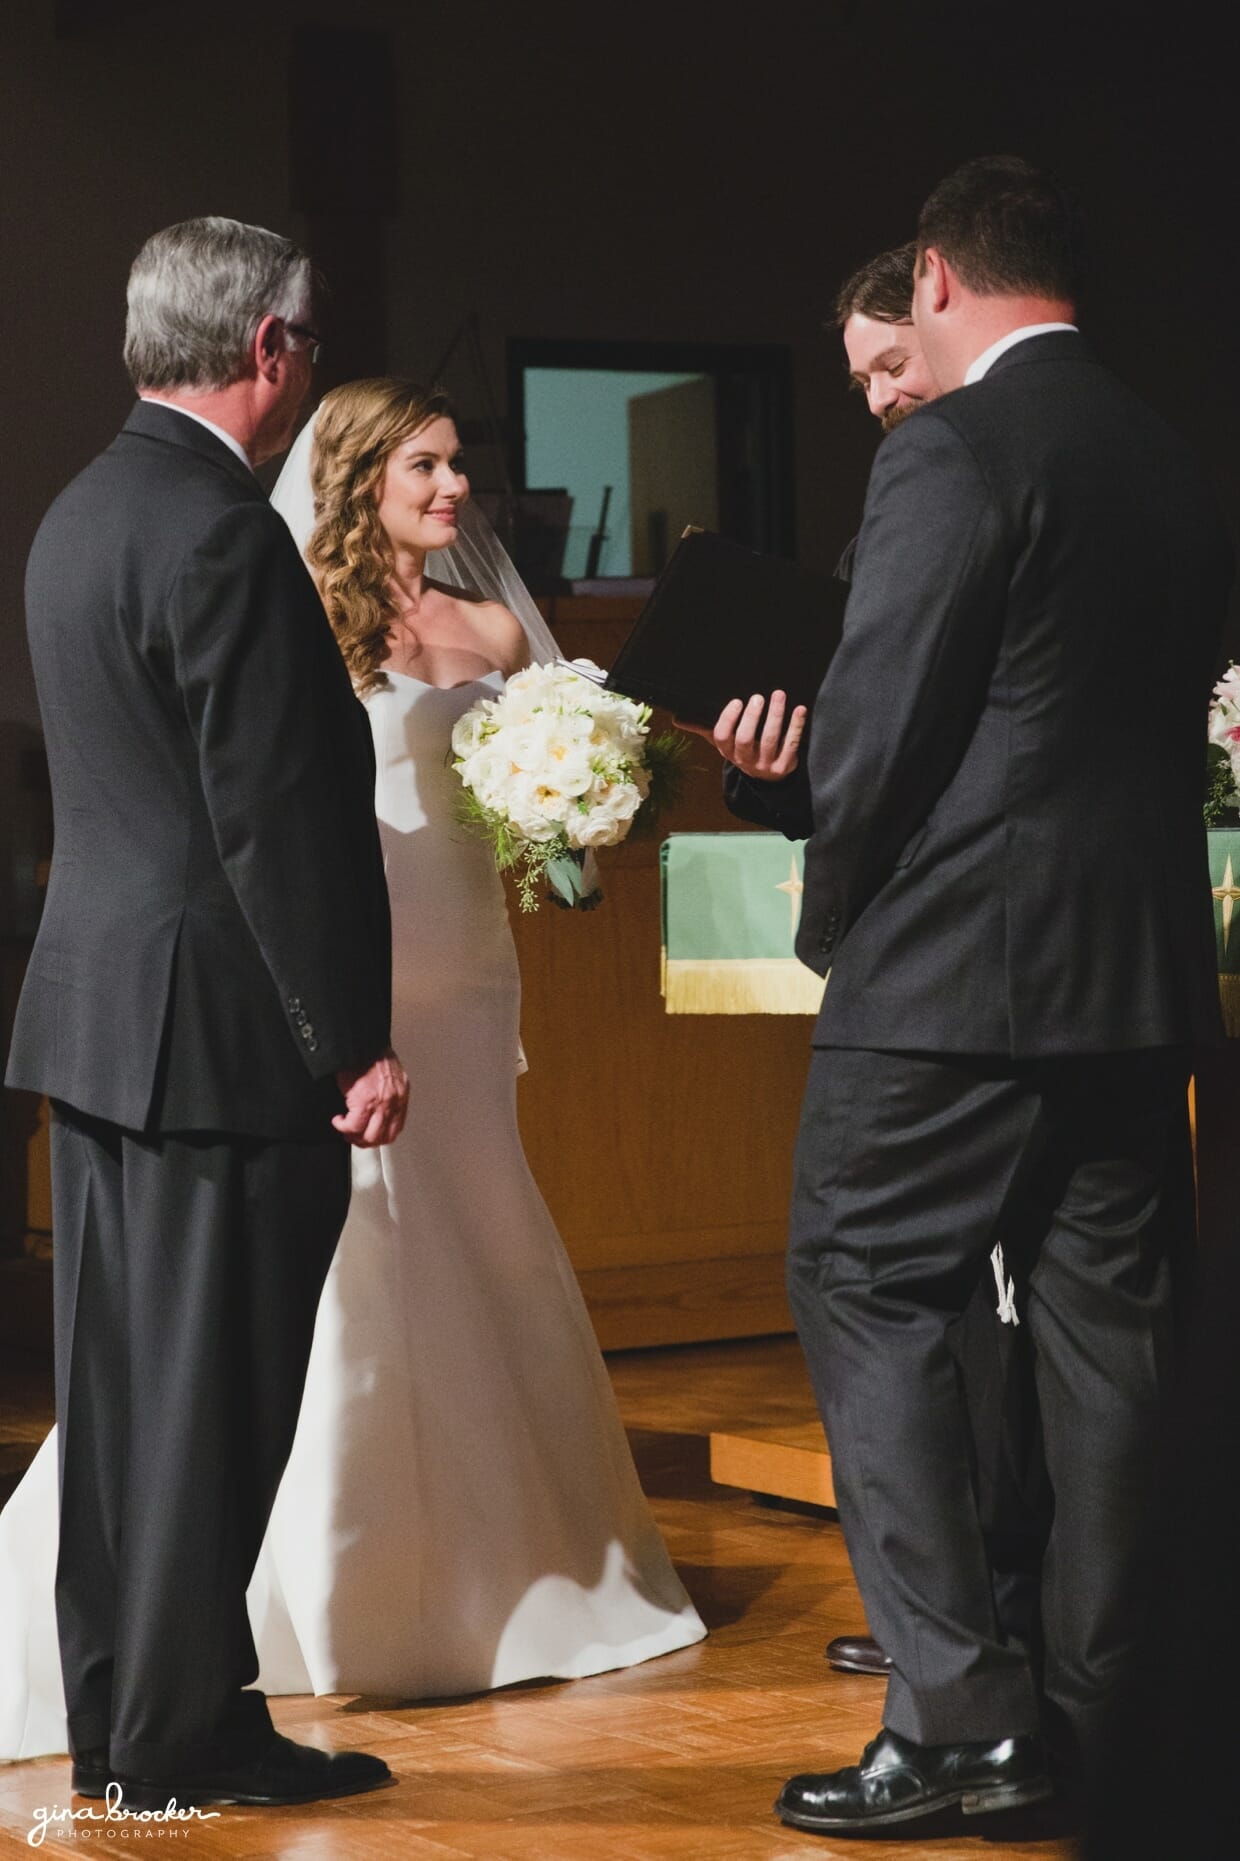 The bride smiles during her church wedding ceremony of her classic and elegant Boston Wedding